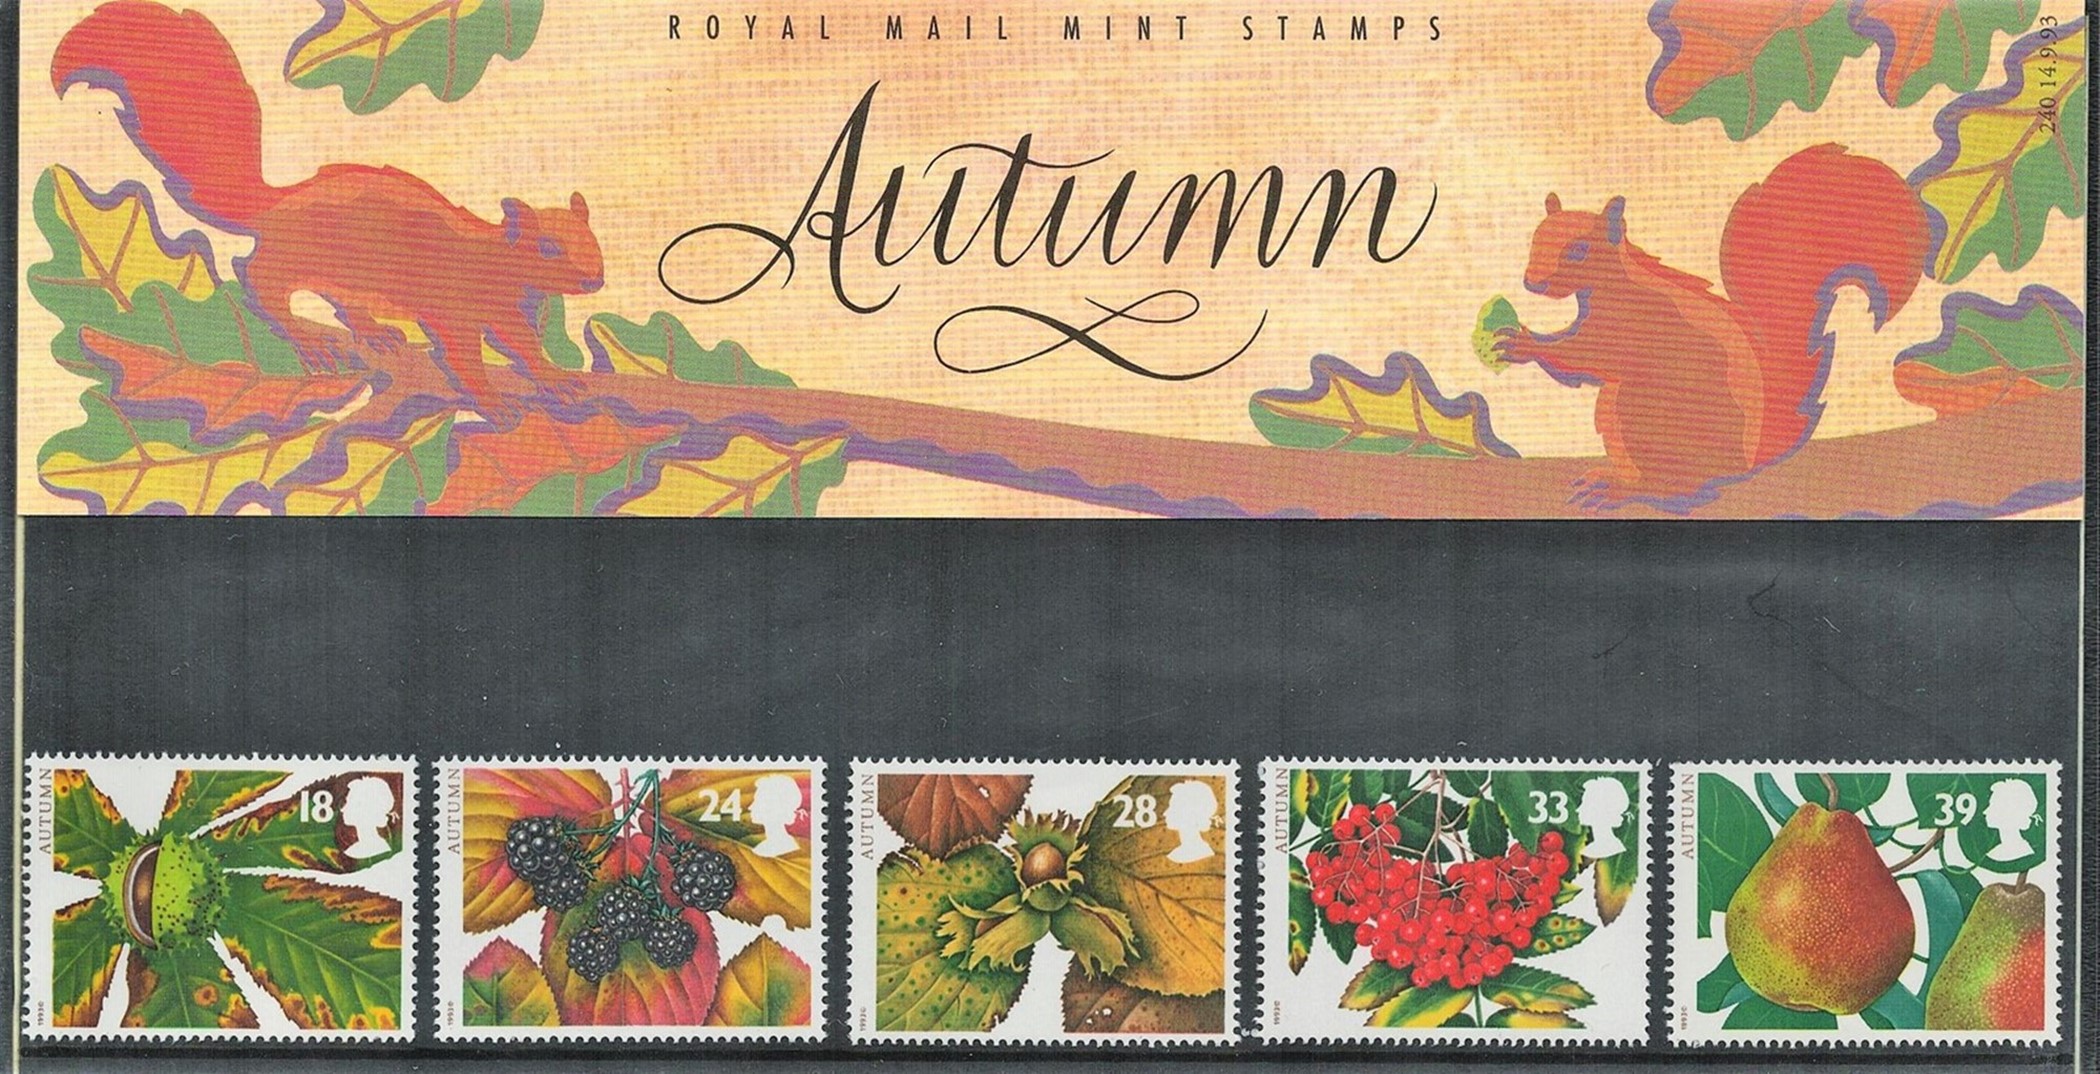 GB Mint Stamps Presentation Pack no 240 Autumn 1993. Good condition. We combine postage on